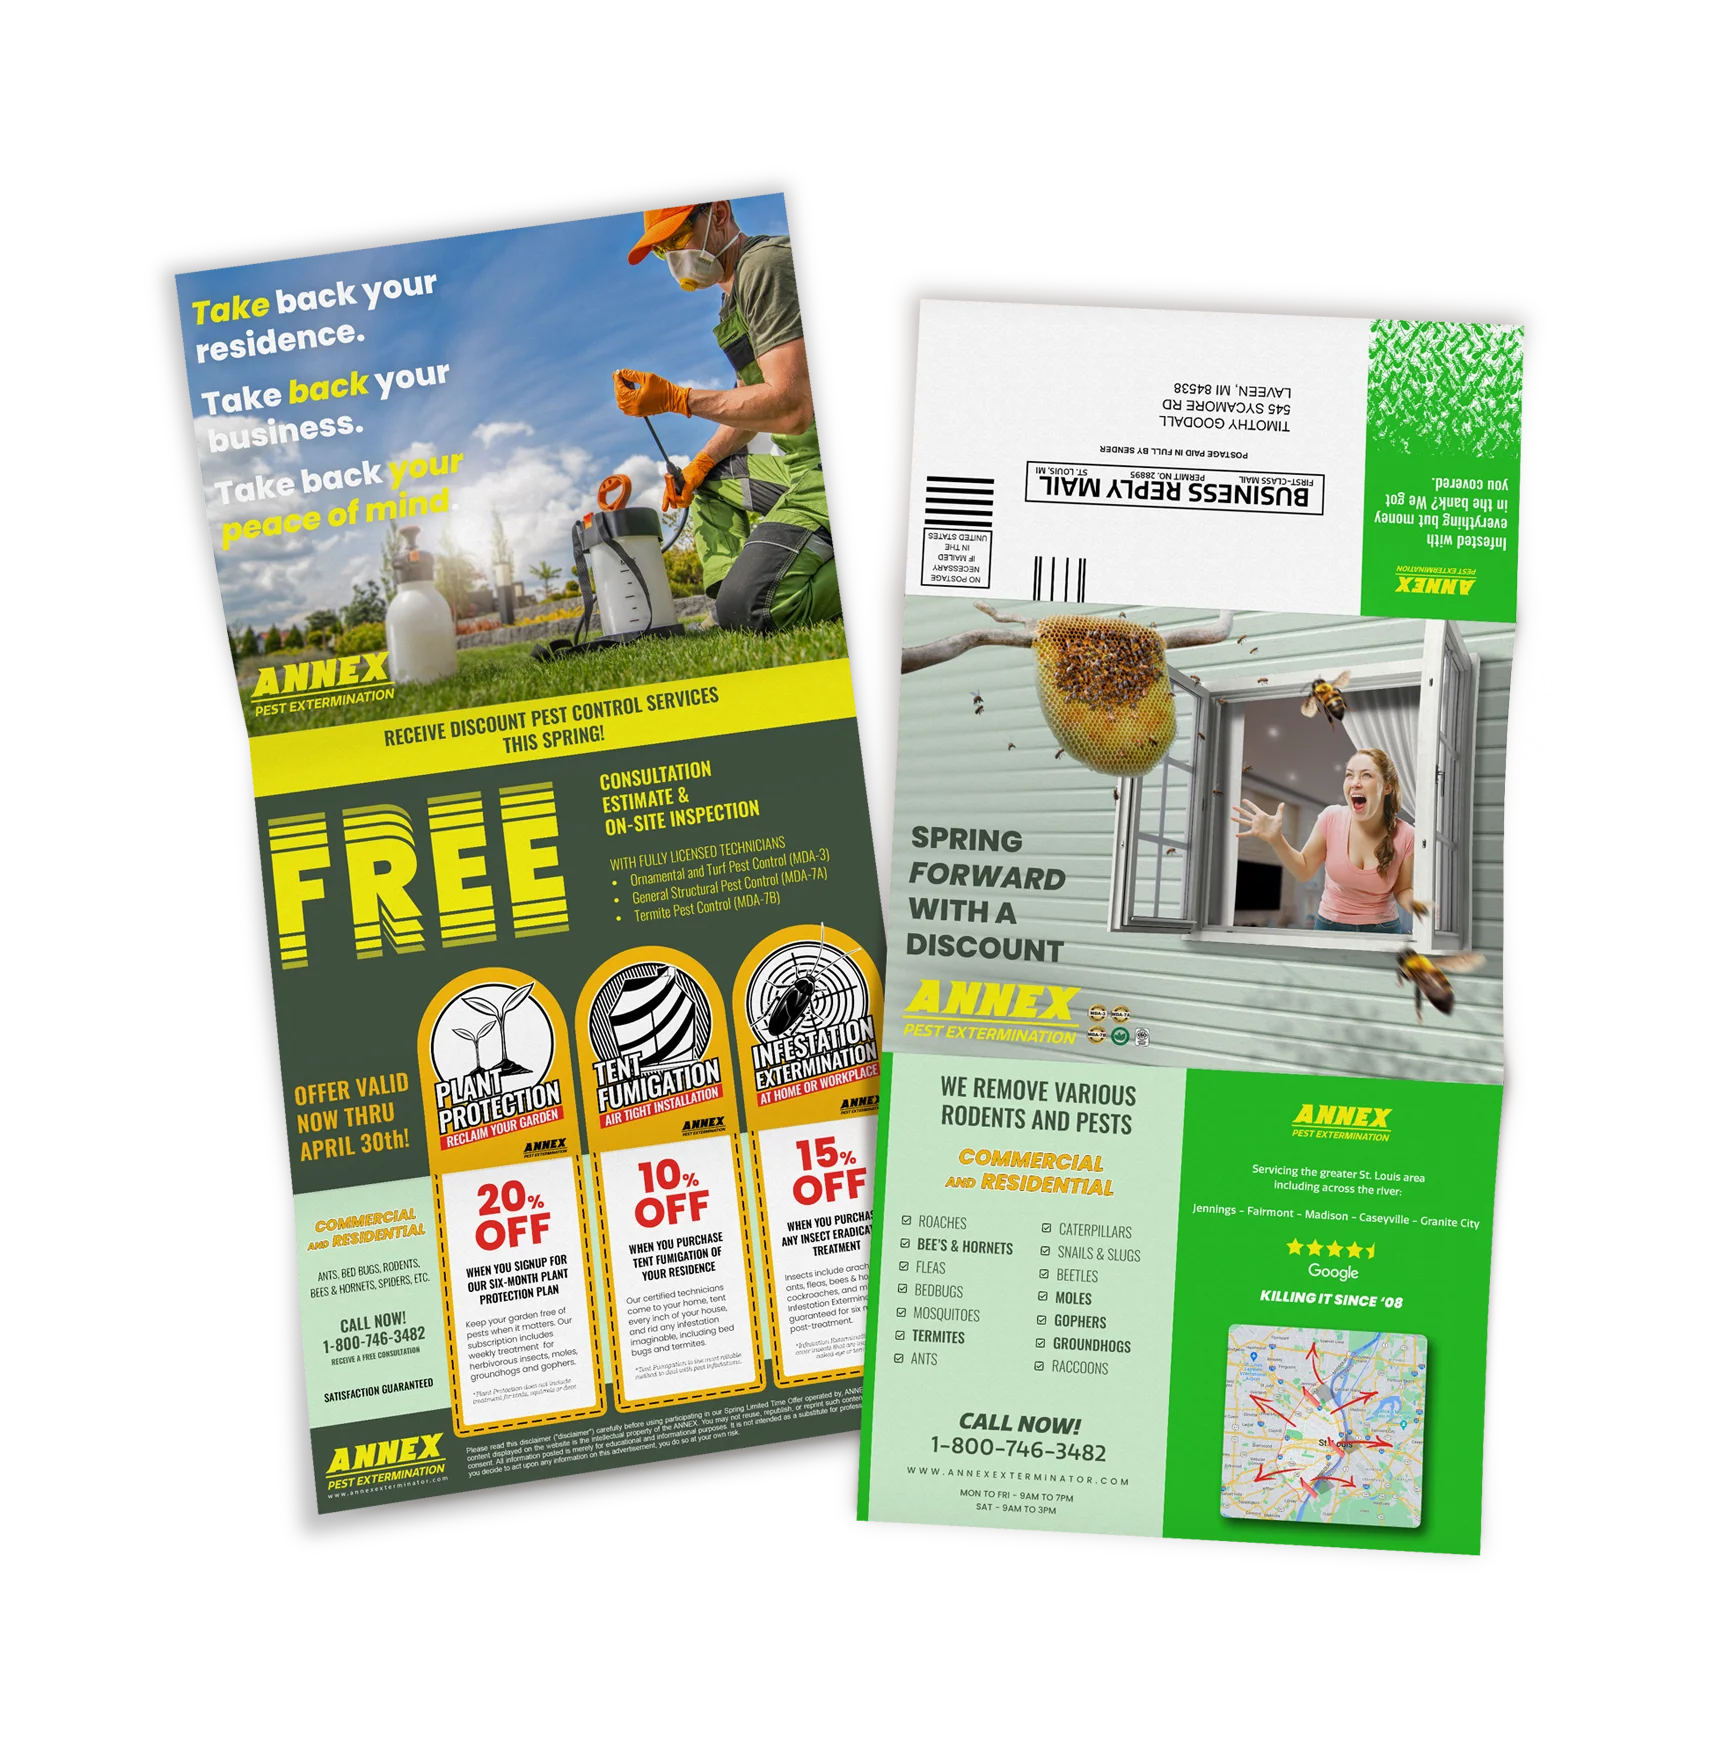 Direct Mail marketing design for pest control company's marketing campaign